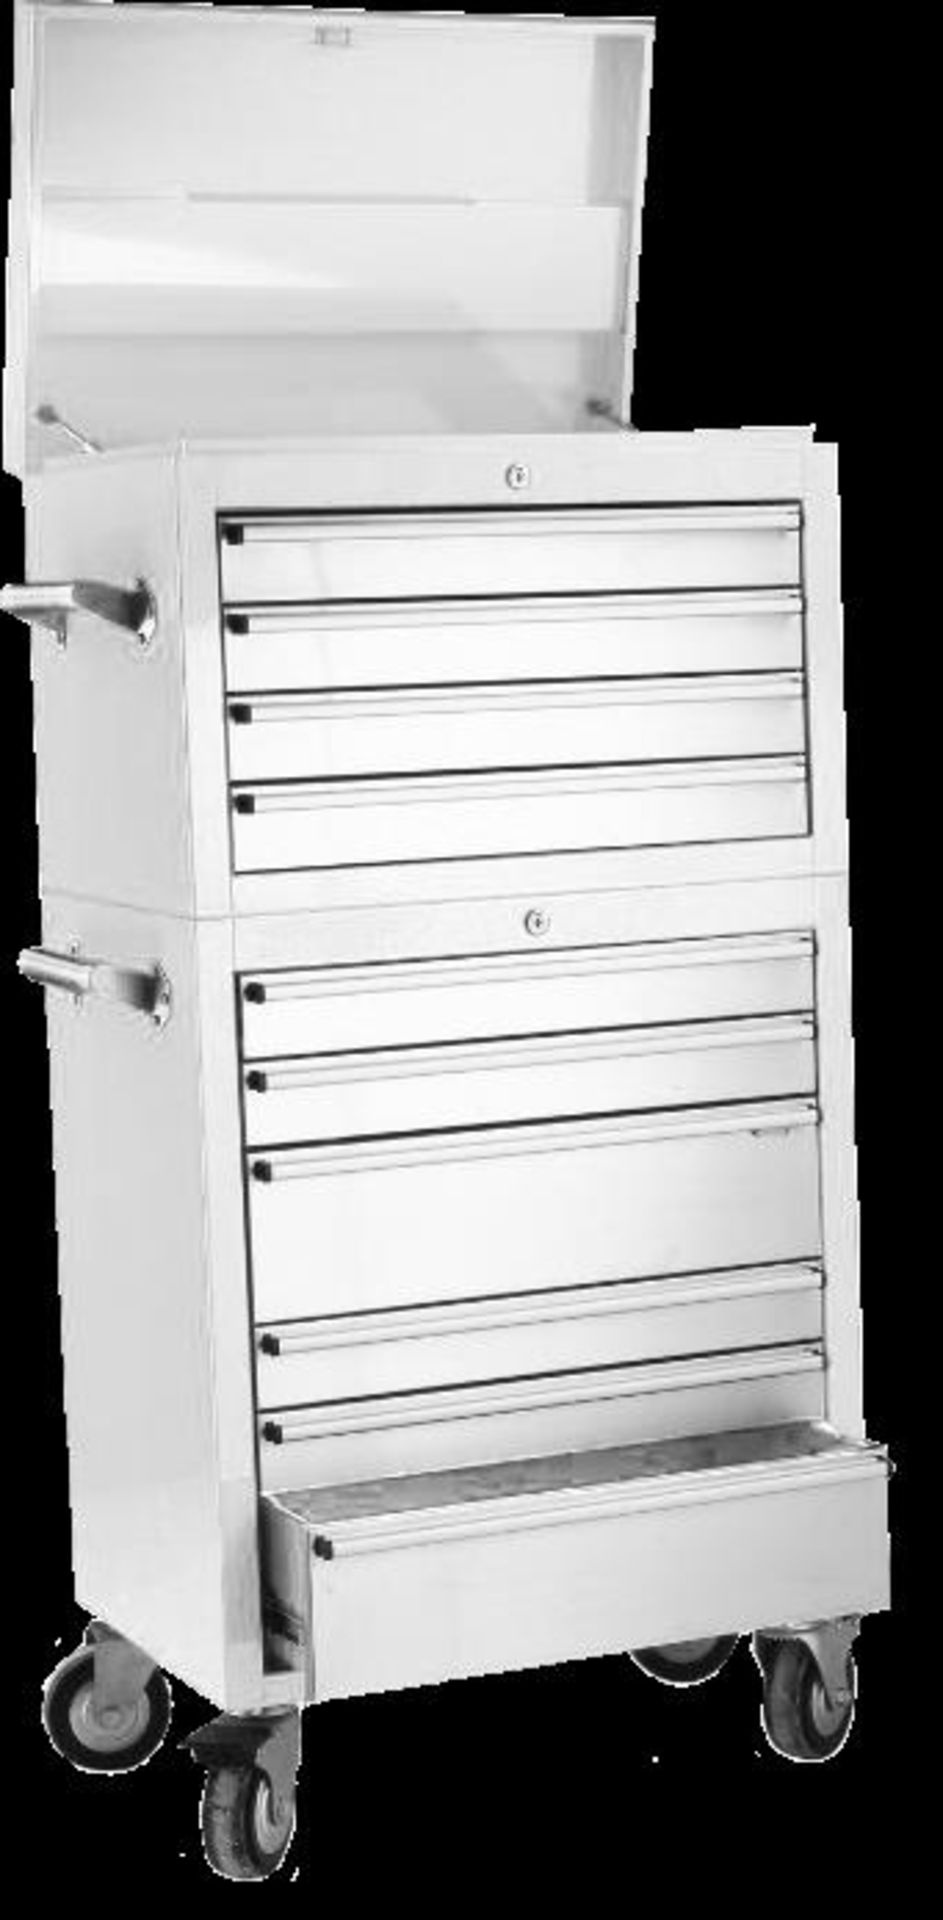 10 units x 26 inch 10 draw stainless steel storage unit 661mm W x 1280mm H 460mm D NEW and BOXED